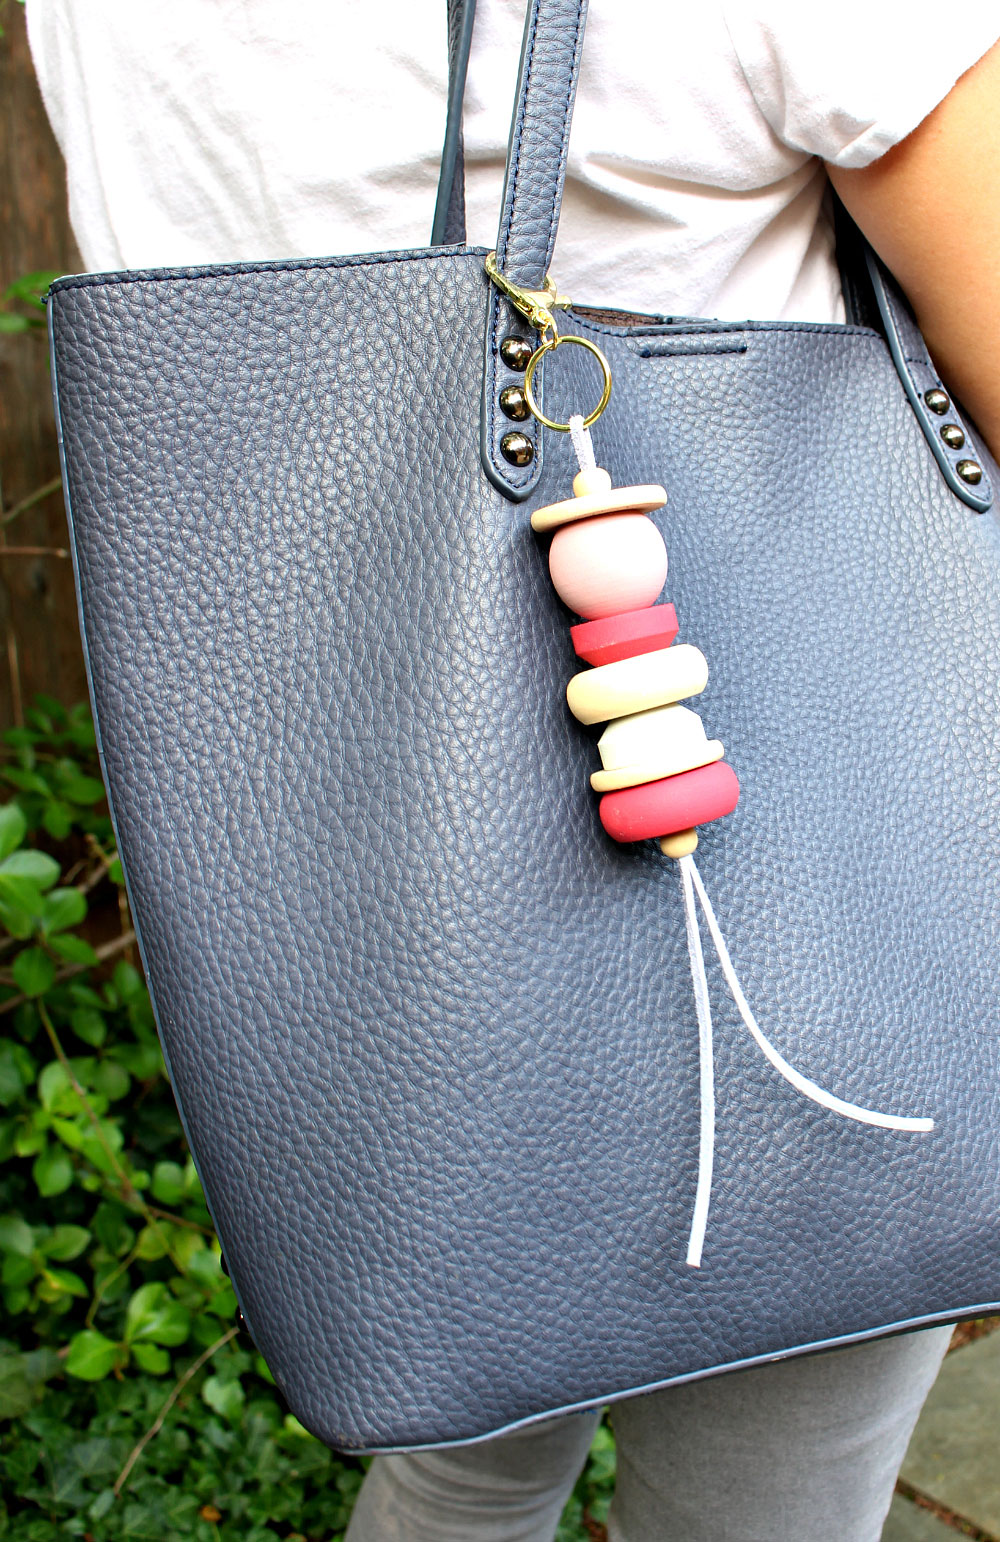 How to make a DIY wood and leather bag tassel - easy craft project!